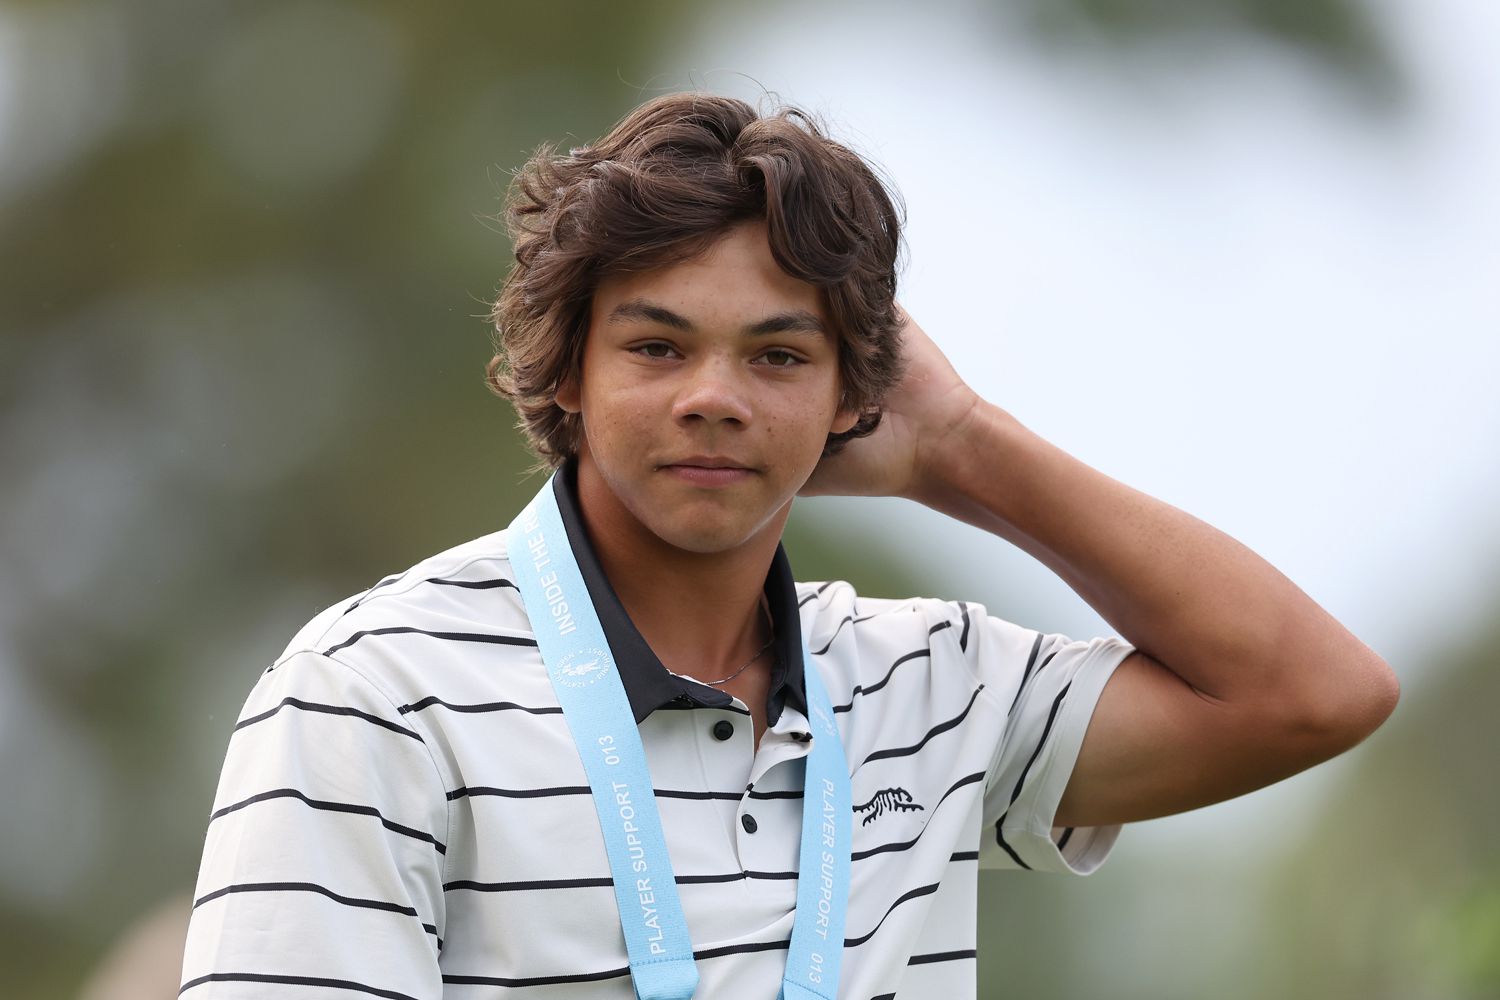 Charlie Woods, son of Tiger Woods looks on during a practice round prior to the U.S. Open at Pinehurst Resort on June 10, 2024 in Pinehurst, North Carolina.